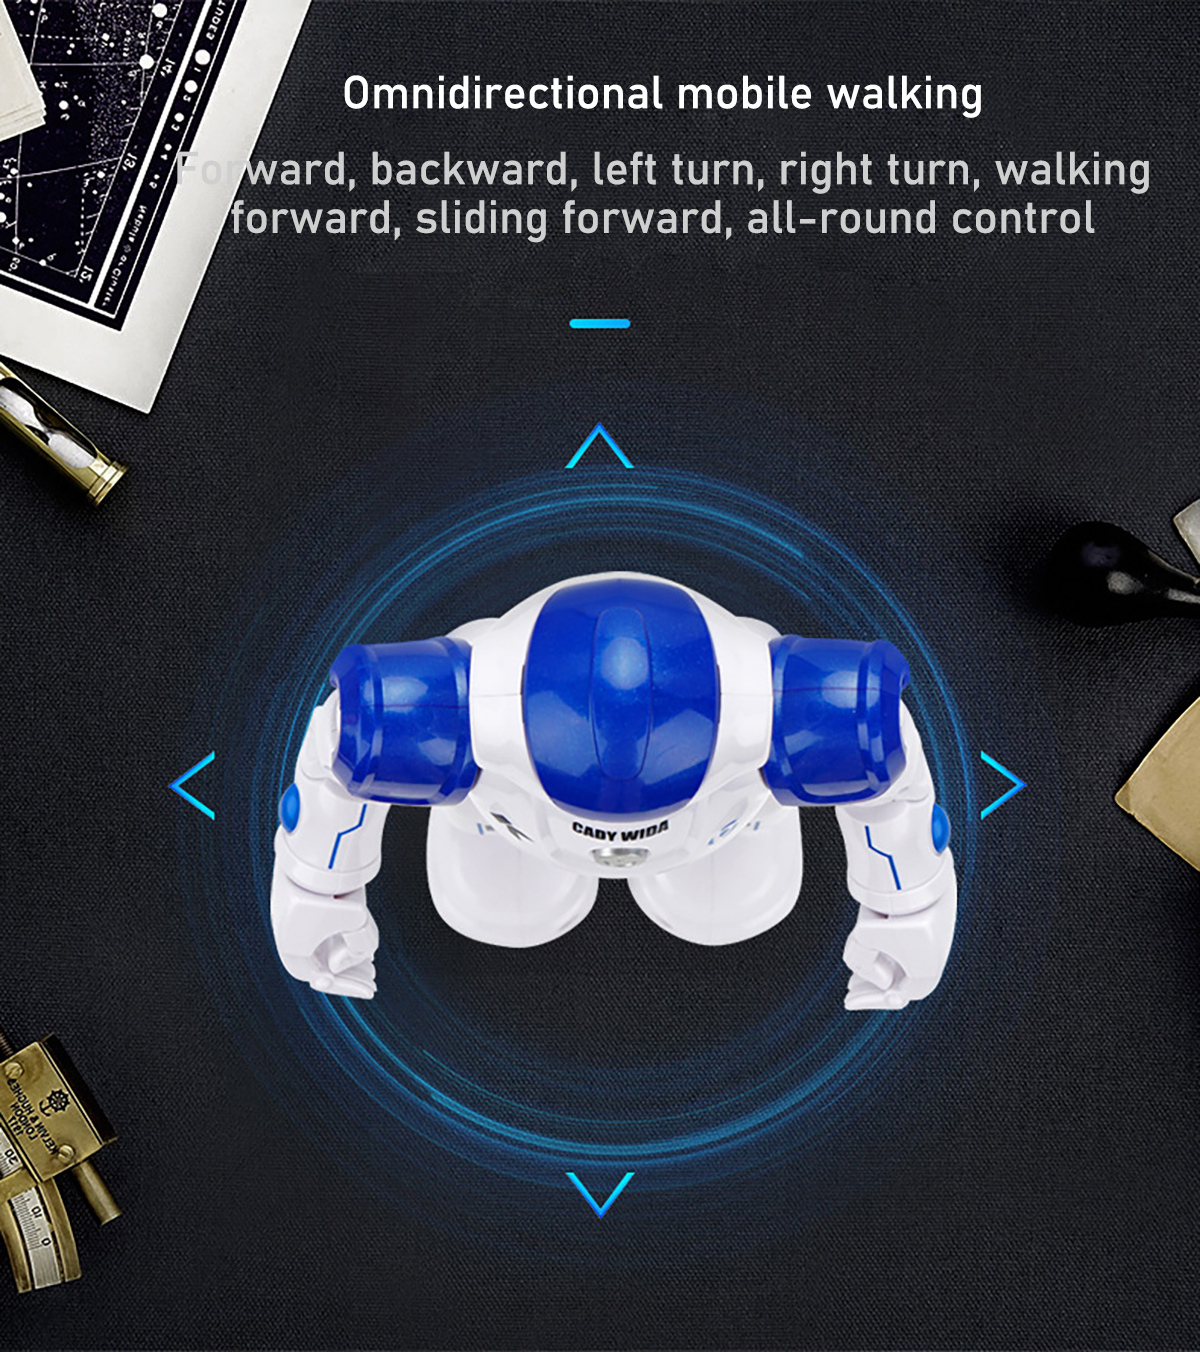 JJRC-R2S-Remote-Control-Programming-Gesture-Induction-Dancing-Robot-1887329-9